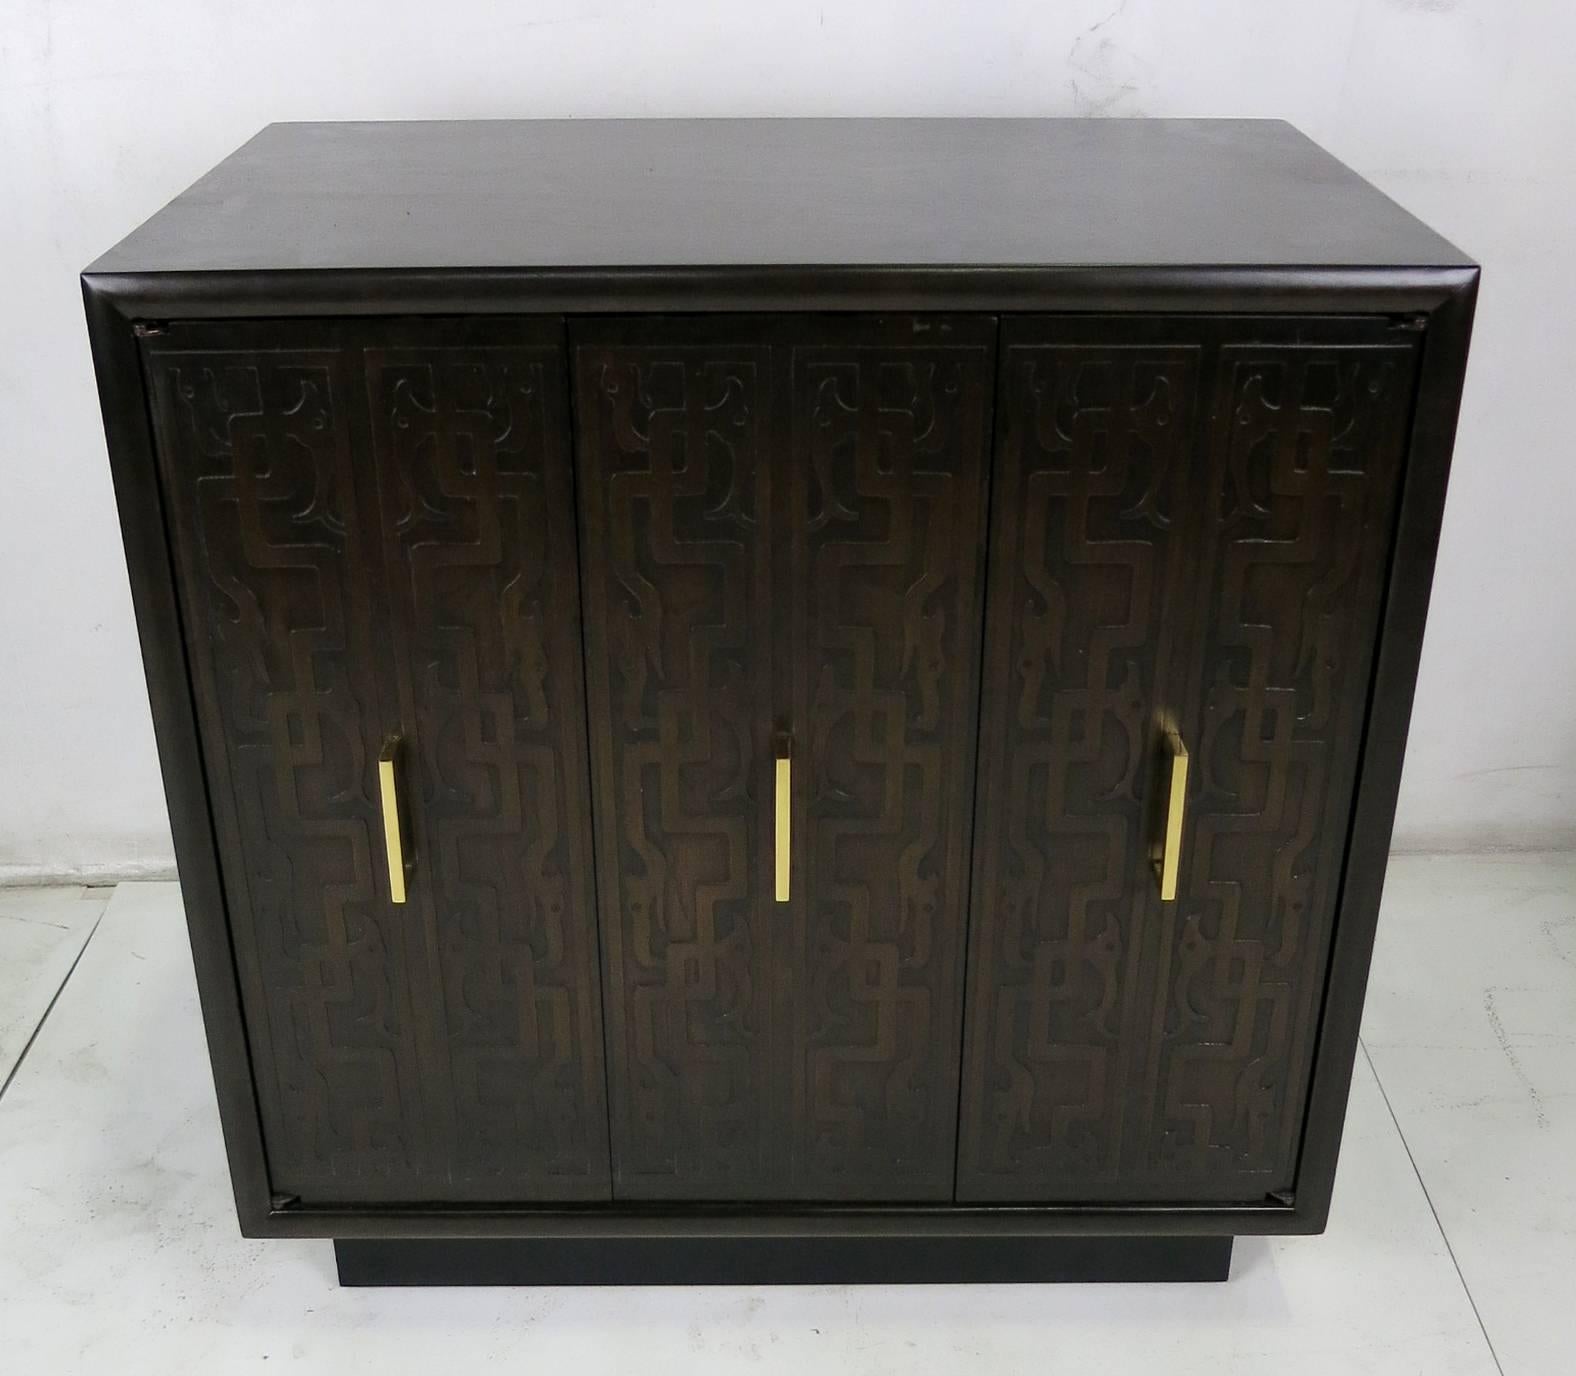 Fine pair of bedside cabinets with carved Tribal design doors. One pair of doors on each cabinet is a bi-fold type along with a single hinged door. Each door has a simple solid polished Brass handle. The cabinets are raised on ebonized wood plinth